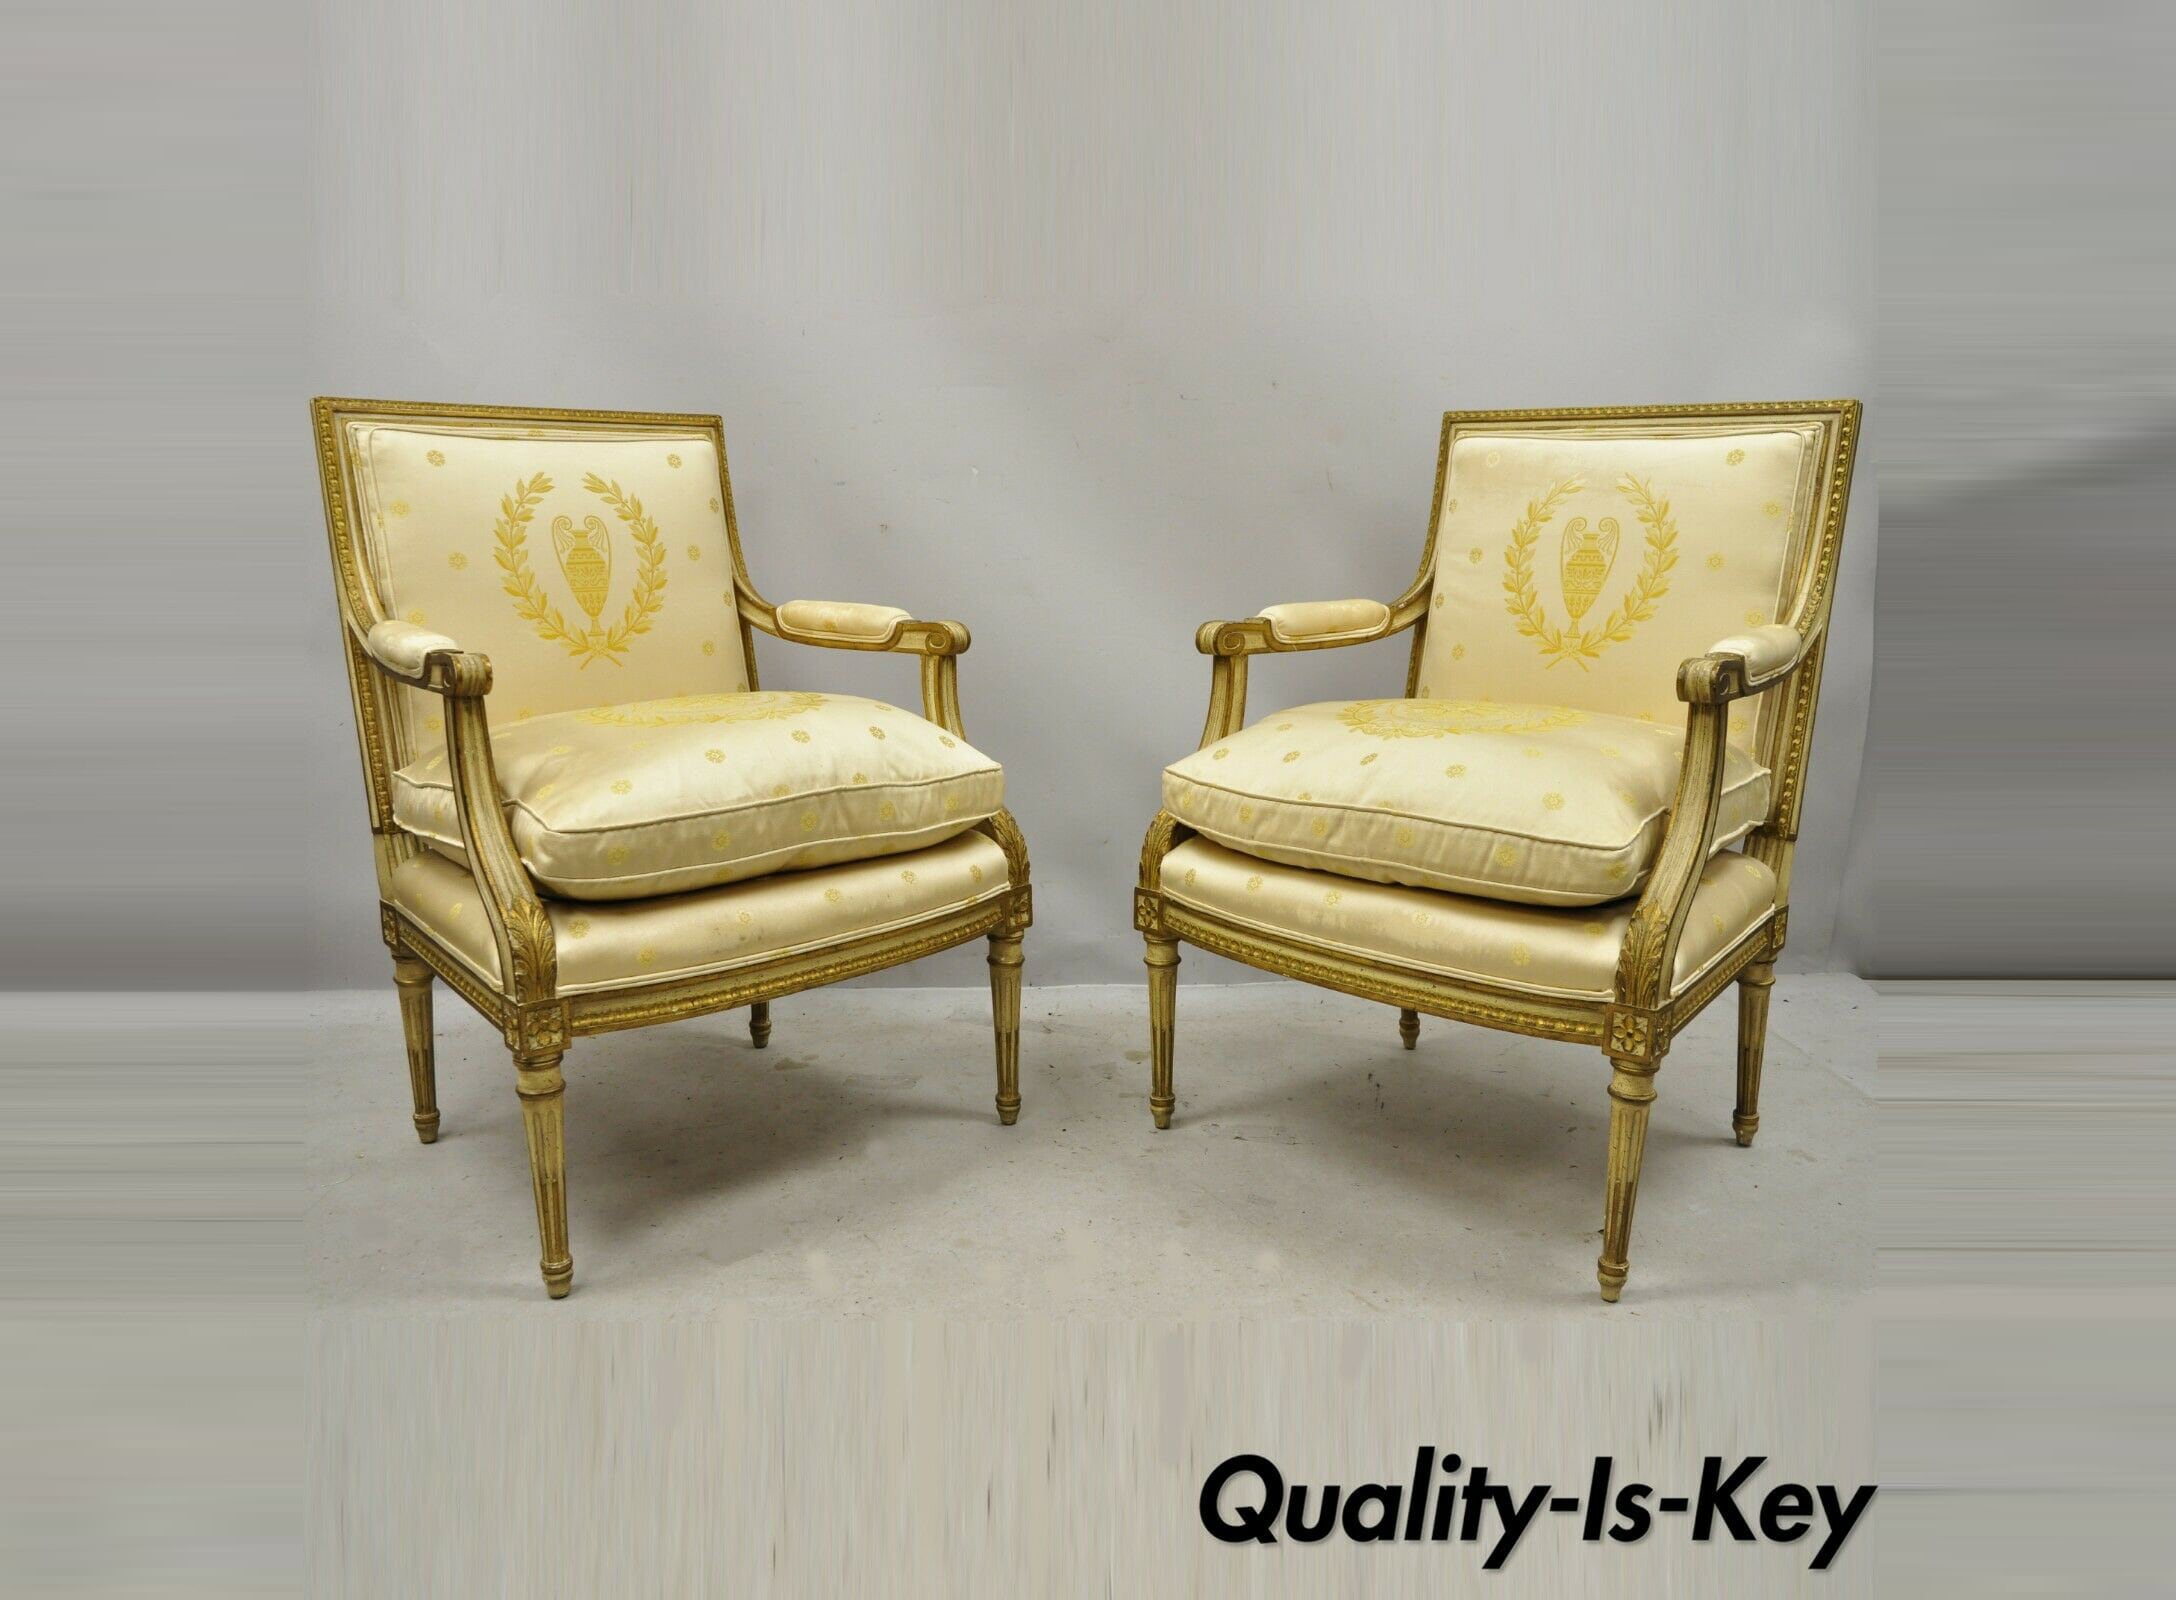 20th Century French Louis XVI Drawing Room Chairs, Set of 8 for